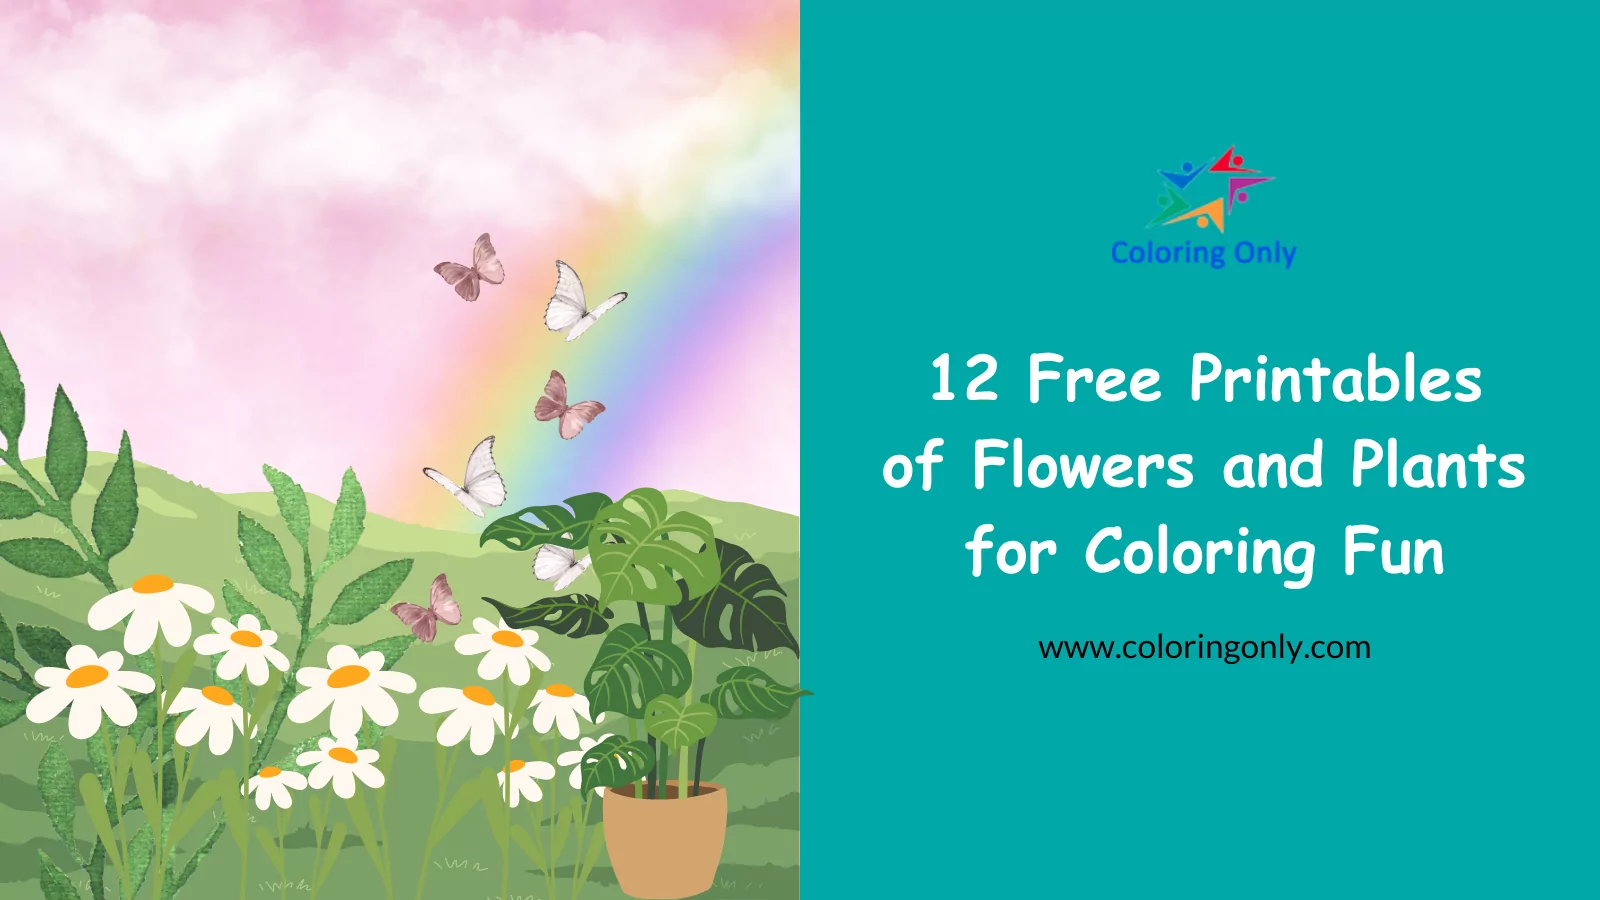 12 Free Printables of Flowers and Plants for Coloring Fun